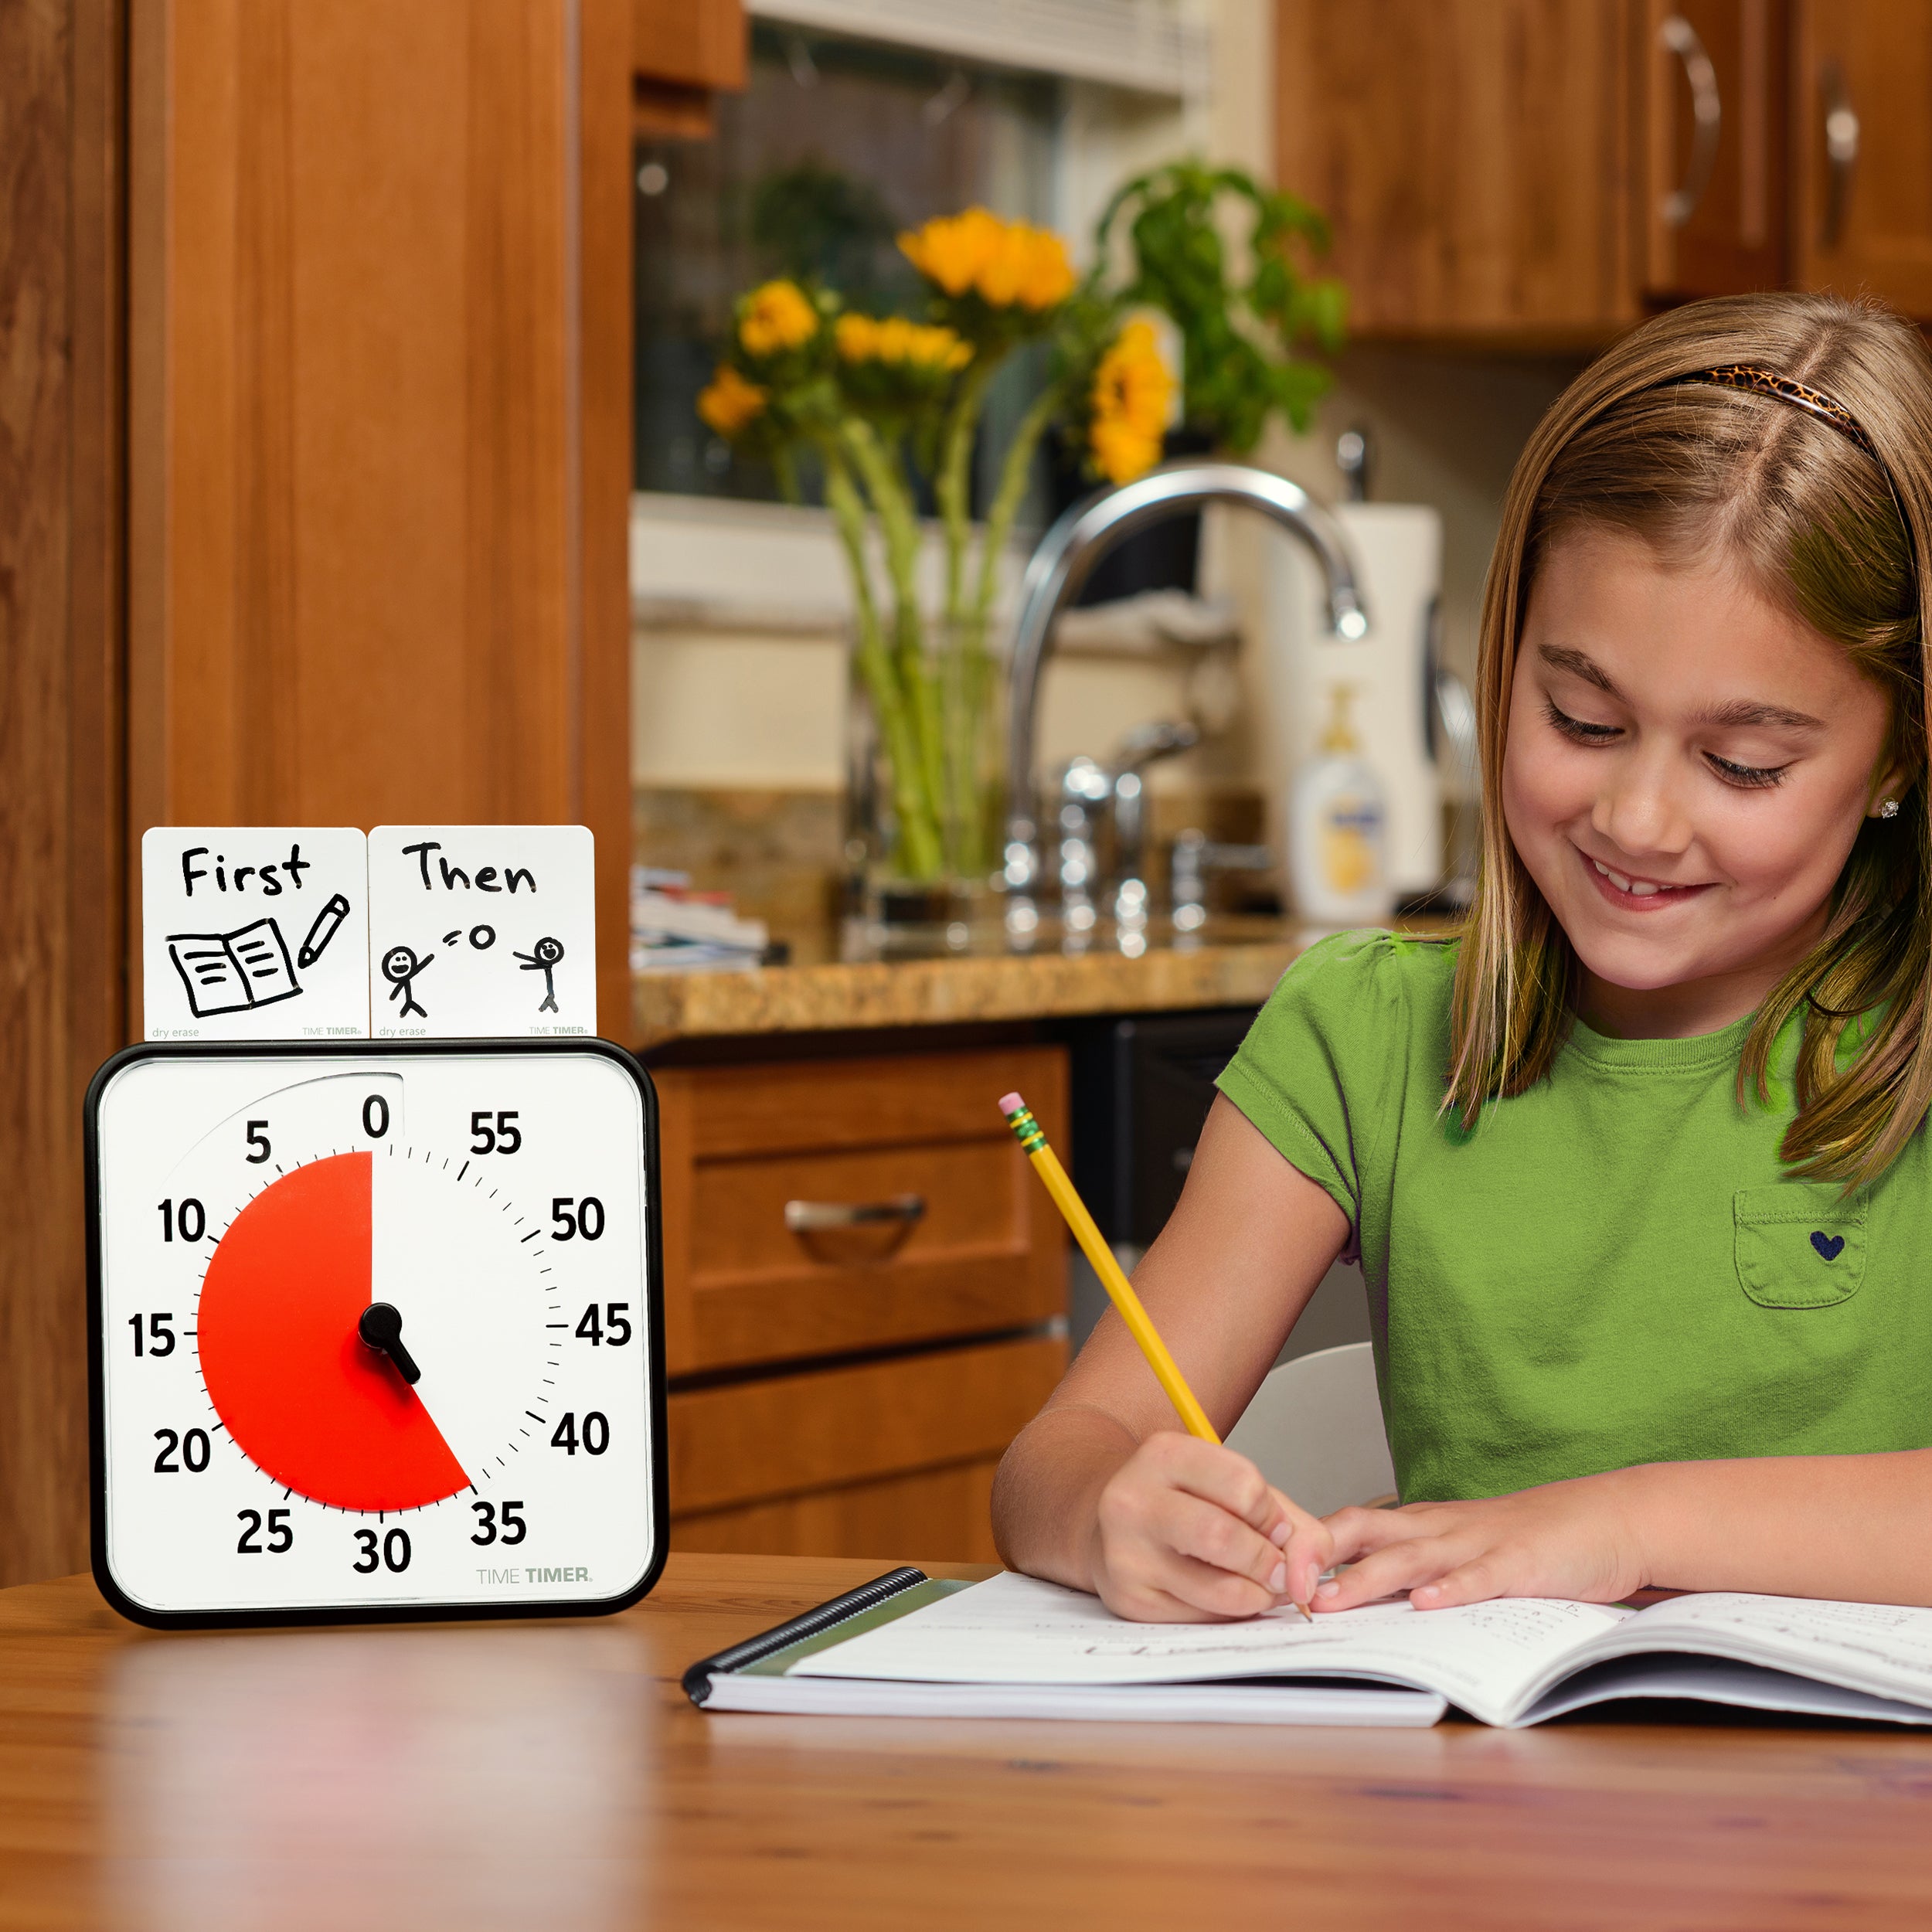 Time Timer Classroom 7 inch 60 Minute Visual for Kids Learning Elementary  Alarm